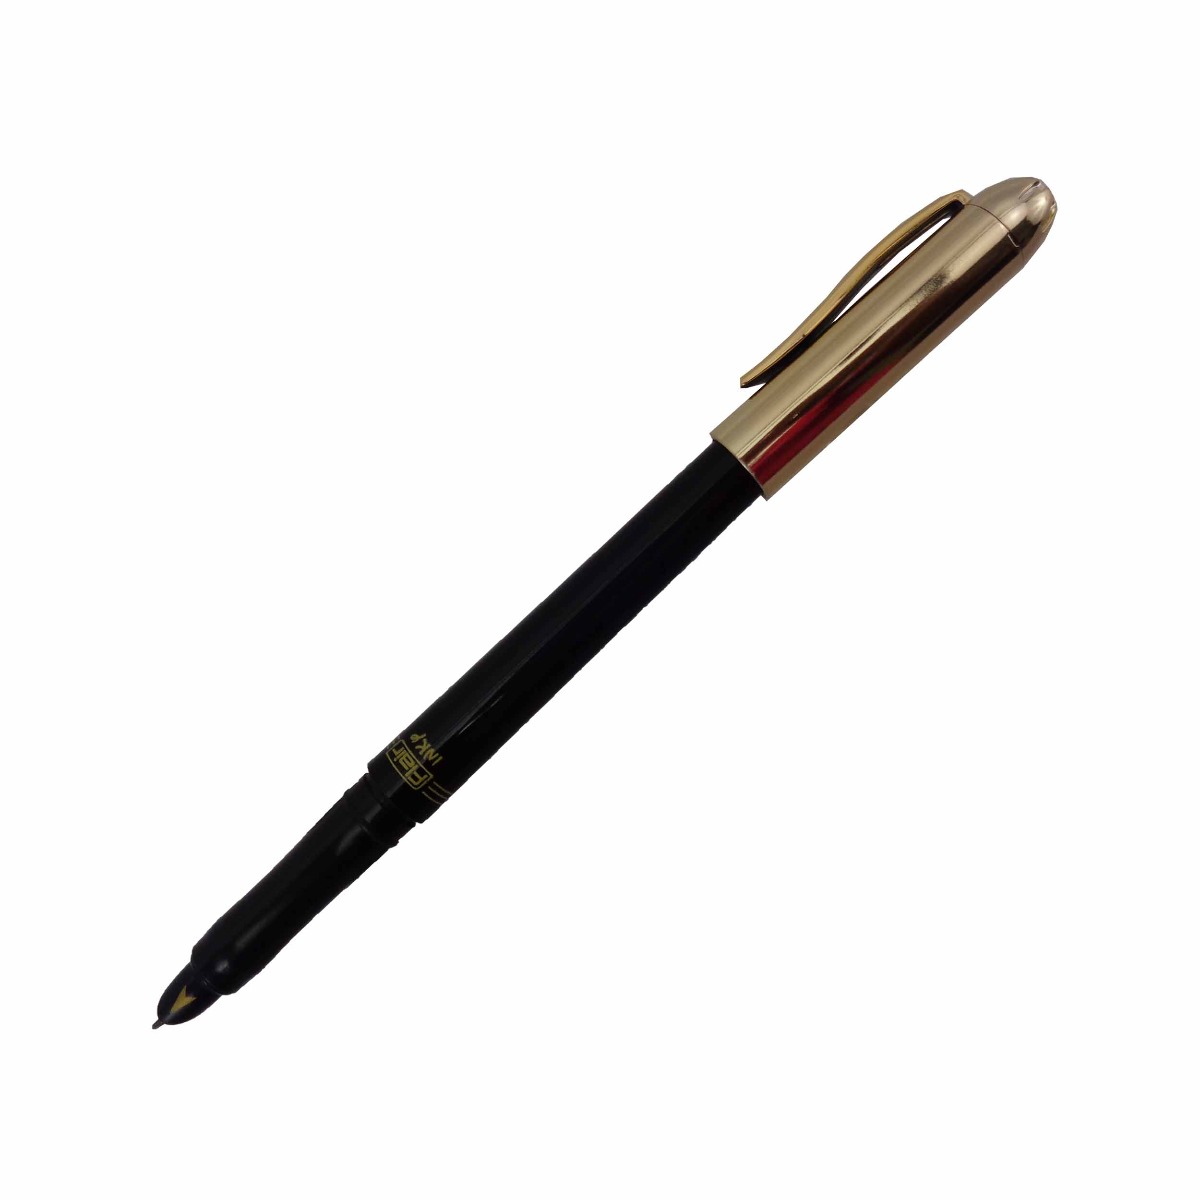 Flair Inky  336 Model:15595 Black Color Body With Gold Cap and 2 Ink Catridge  Fine Nib Fountain Pen